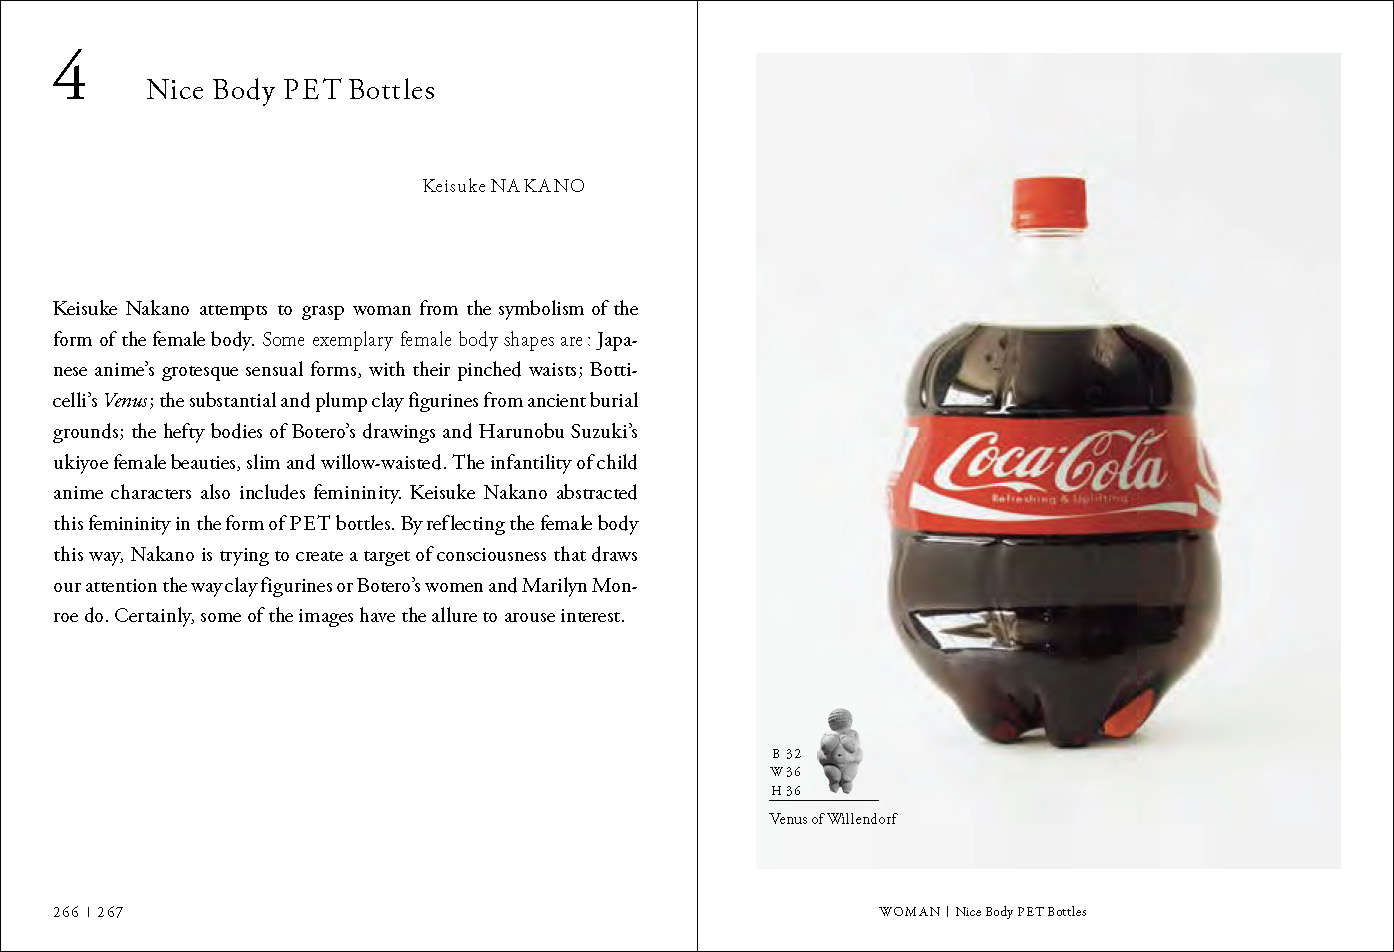 Example from ‘Nice Body PET Bottles’ by Keisuke Nakano, in the 6th Ex-formation theme, ‘WOMAN’.